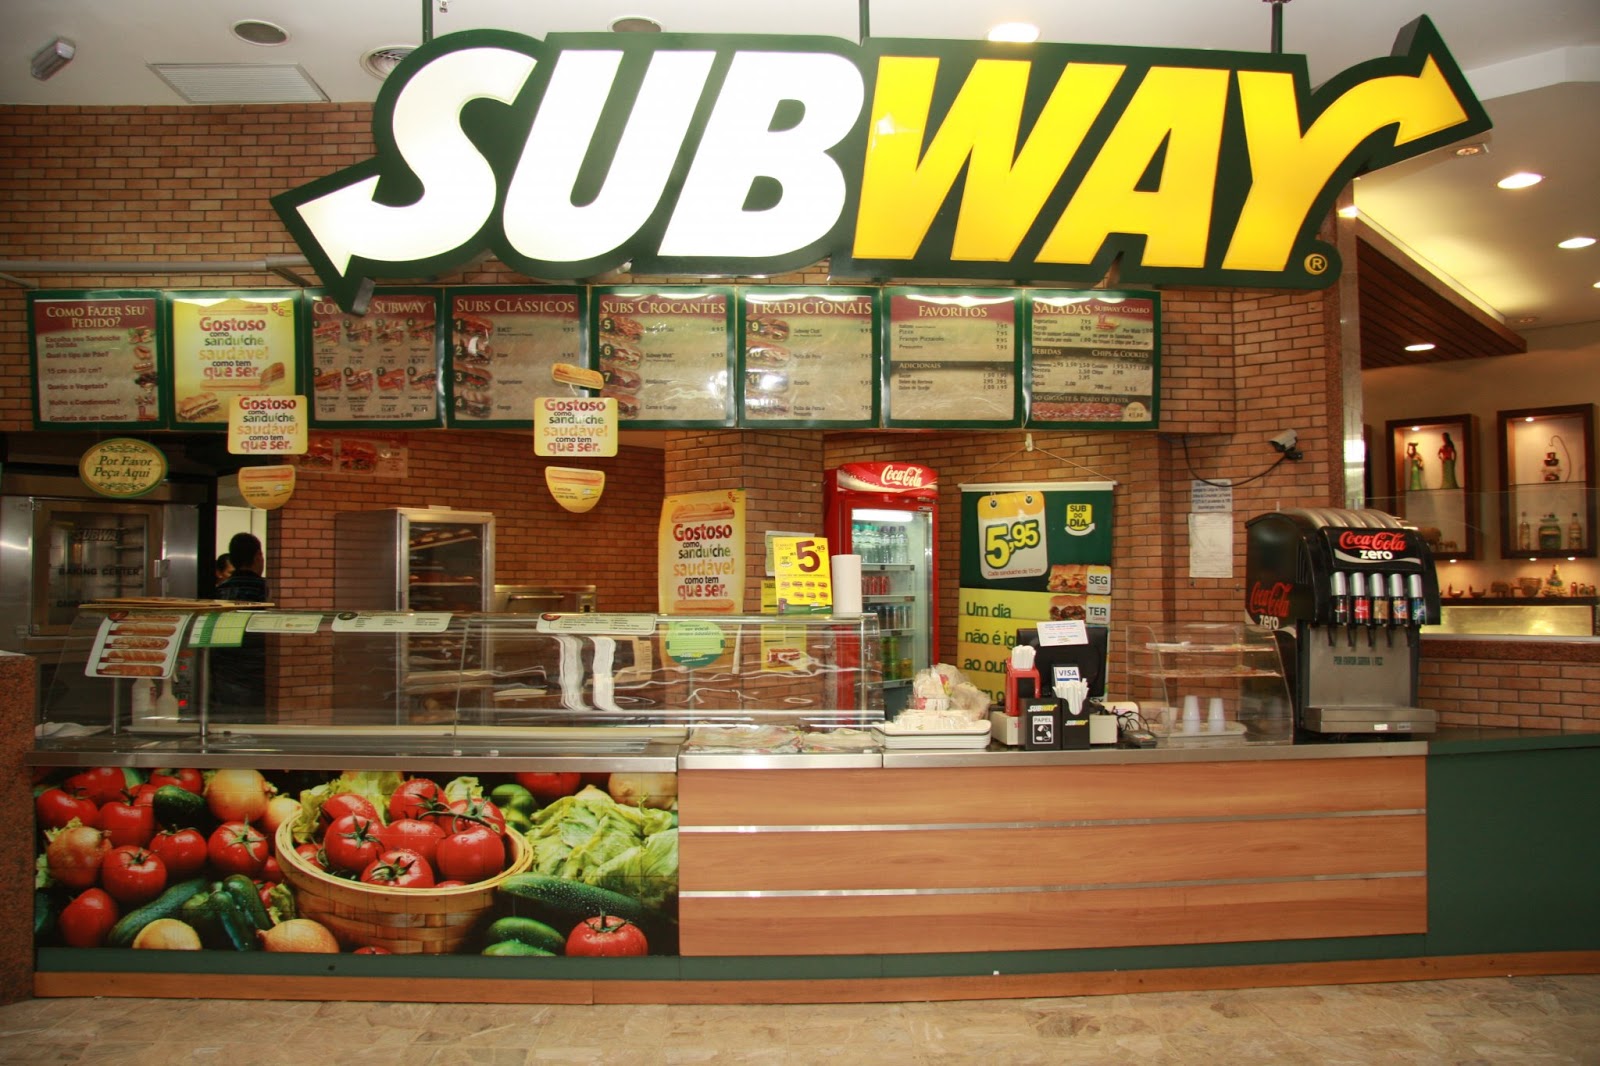 Subway is for sale and could be a good investment